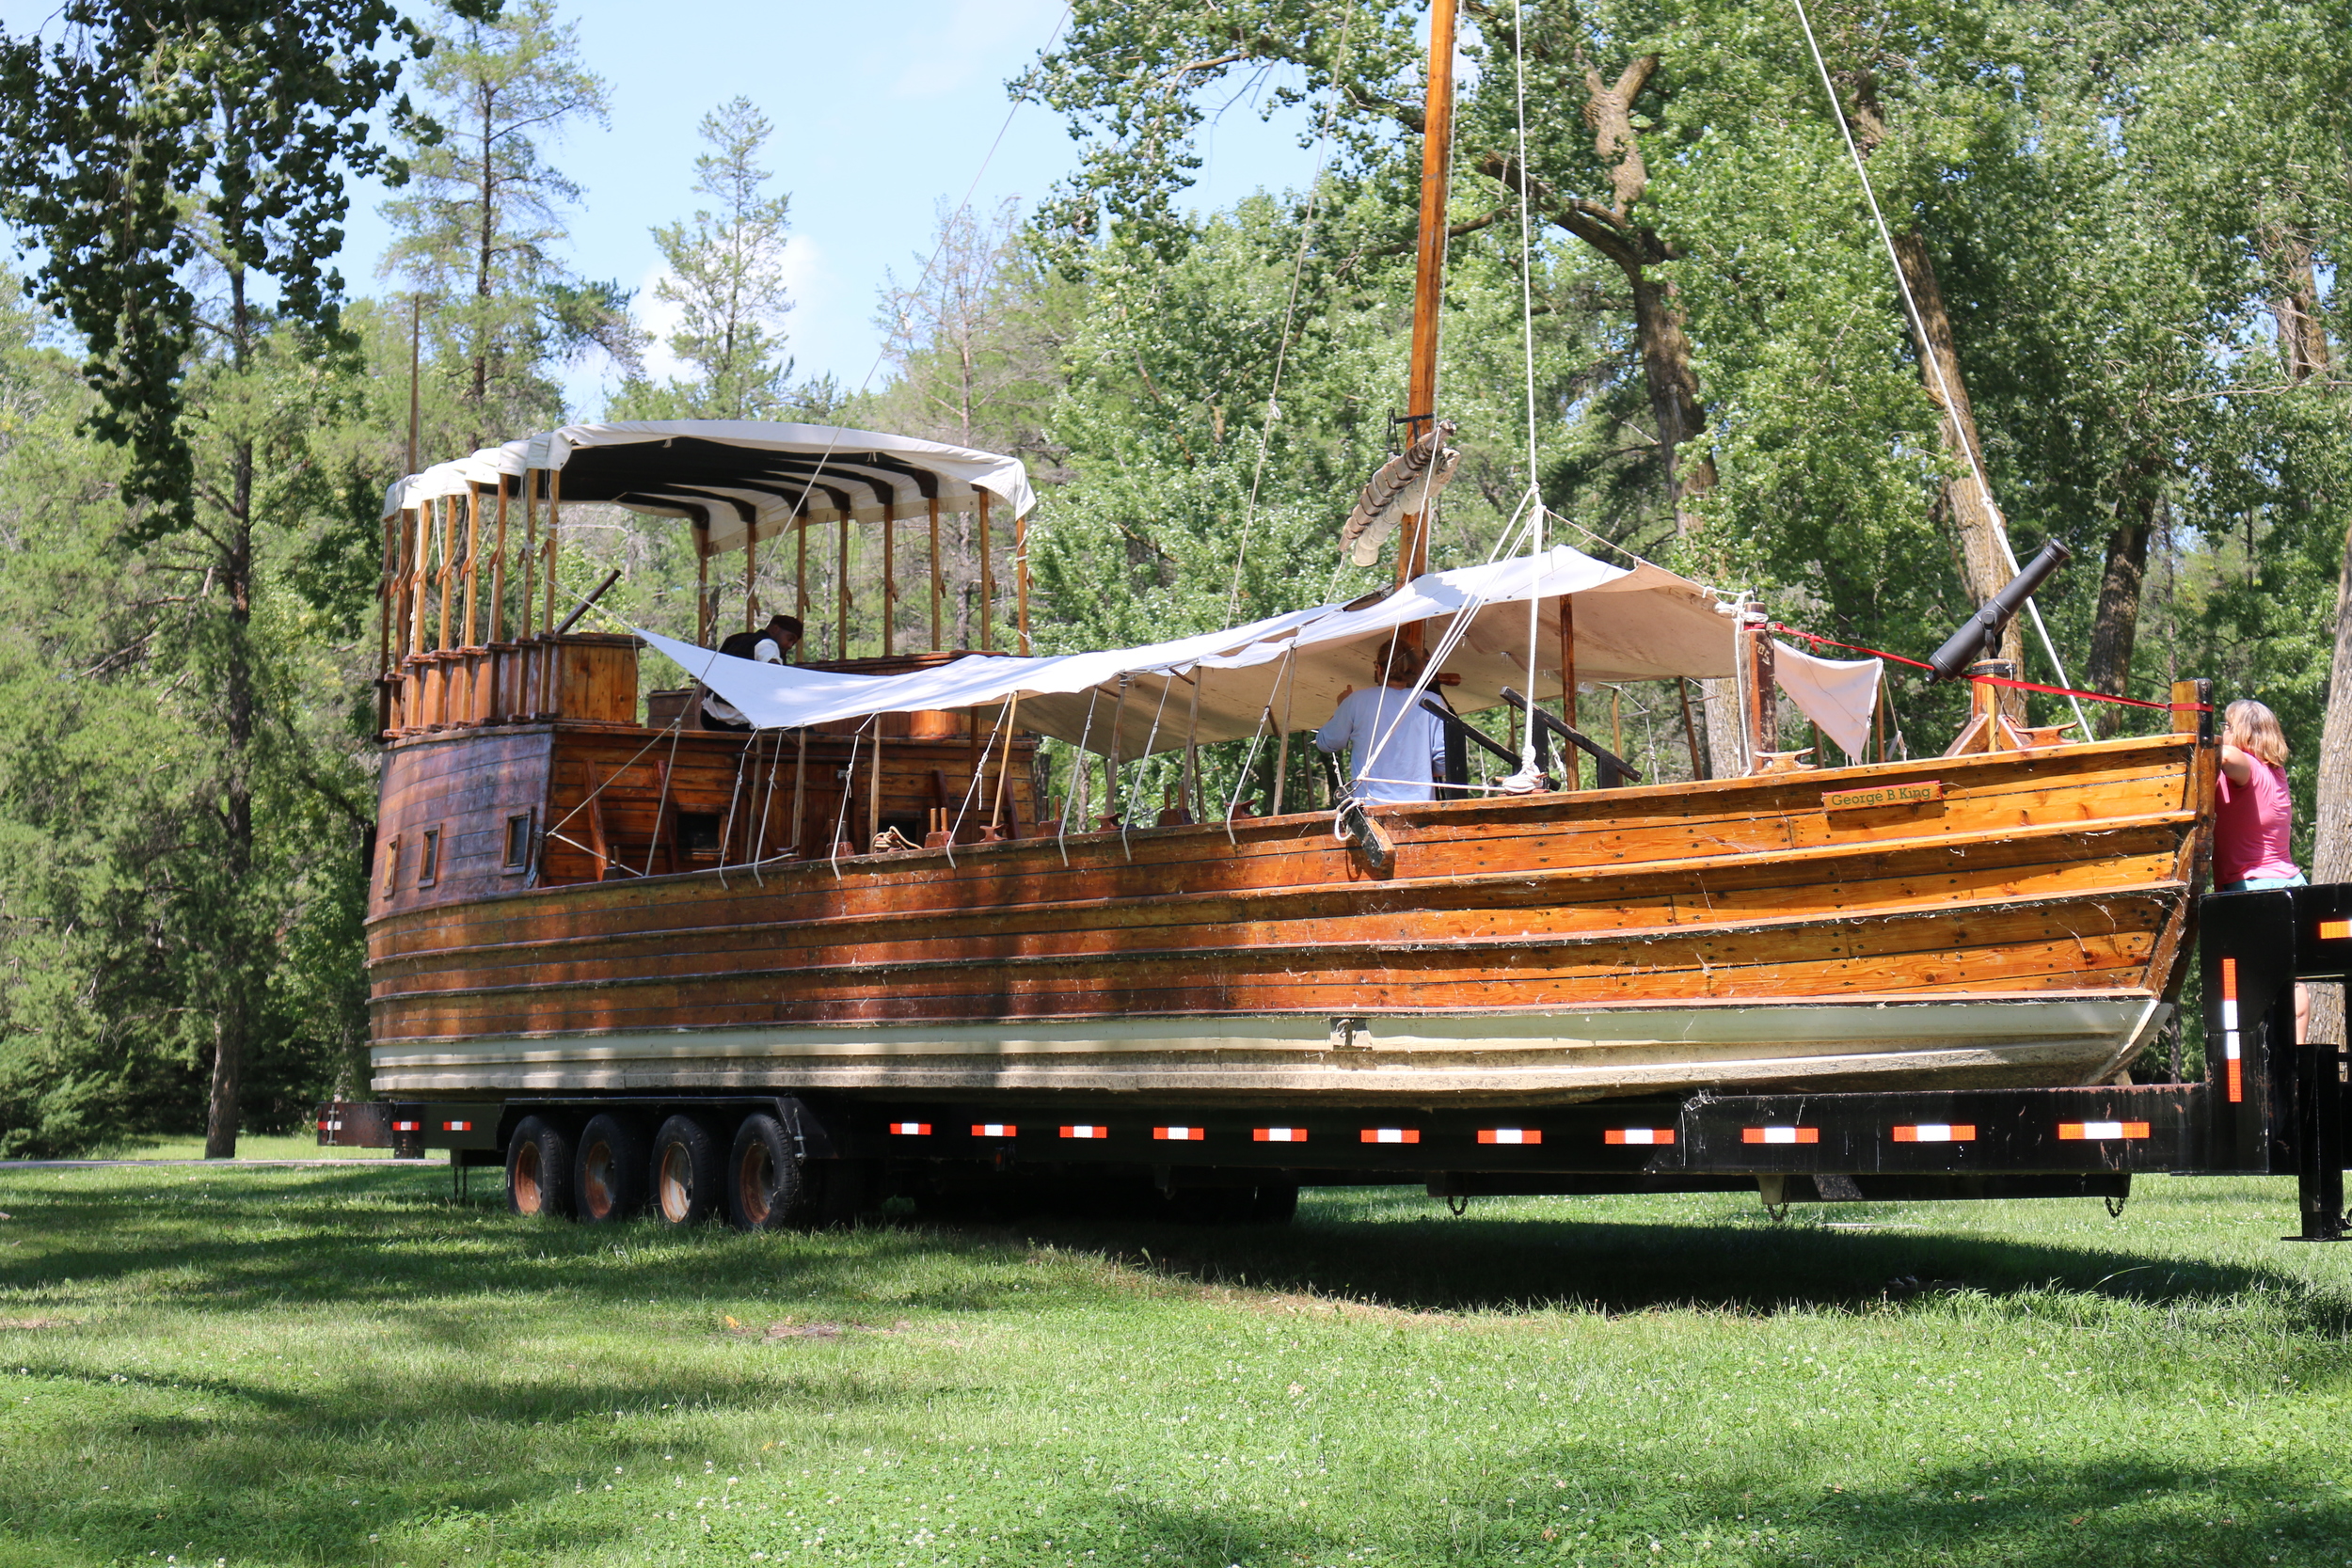 The keel boat replica at Lewis and Clark SP, IA.